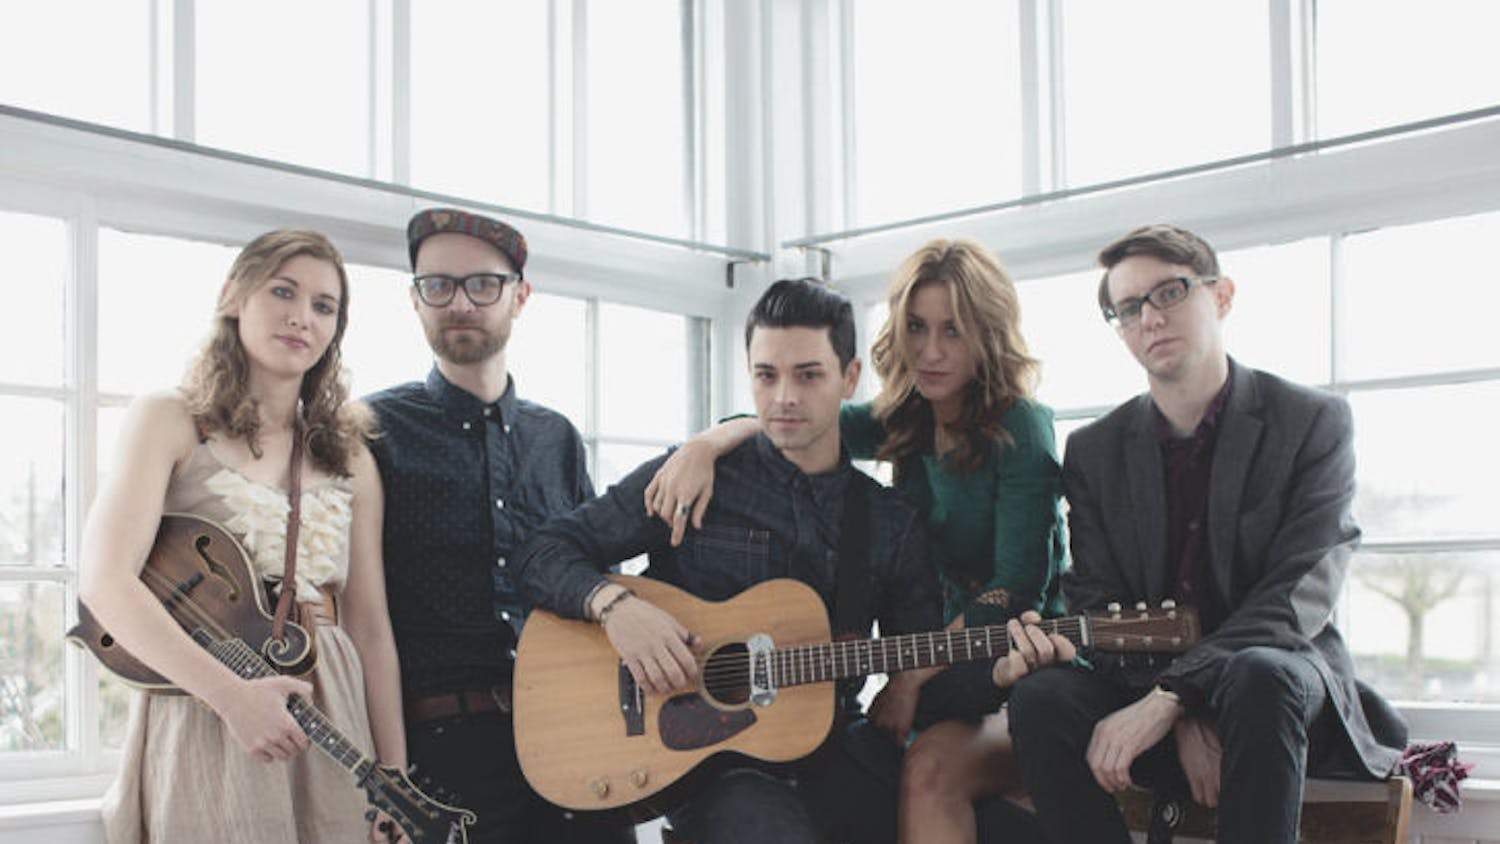 Twin Forks, a folk-punk outfit fronted by former Dashboard Confessional lead, Chris Carrabba, will play at 1982 next Thursday. Tickets are $12 in advance or $14 at the door.&nbsp;
&nbsp;